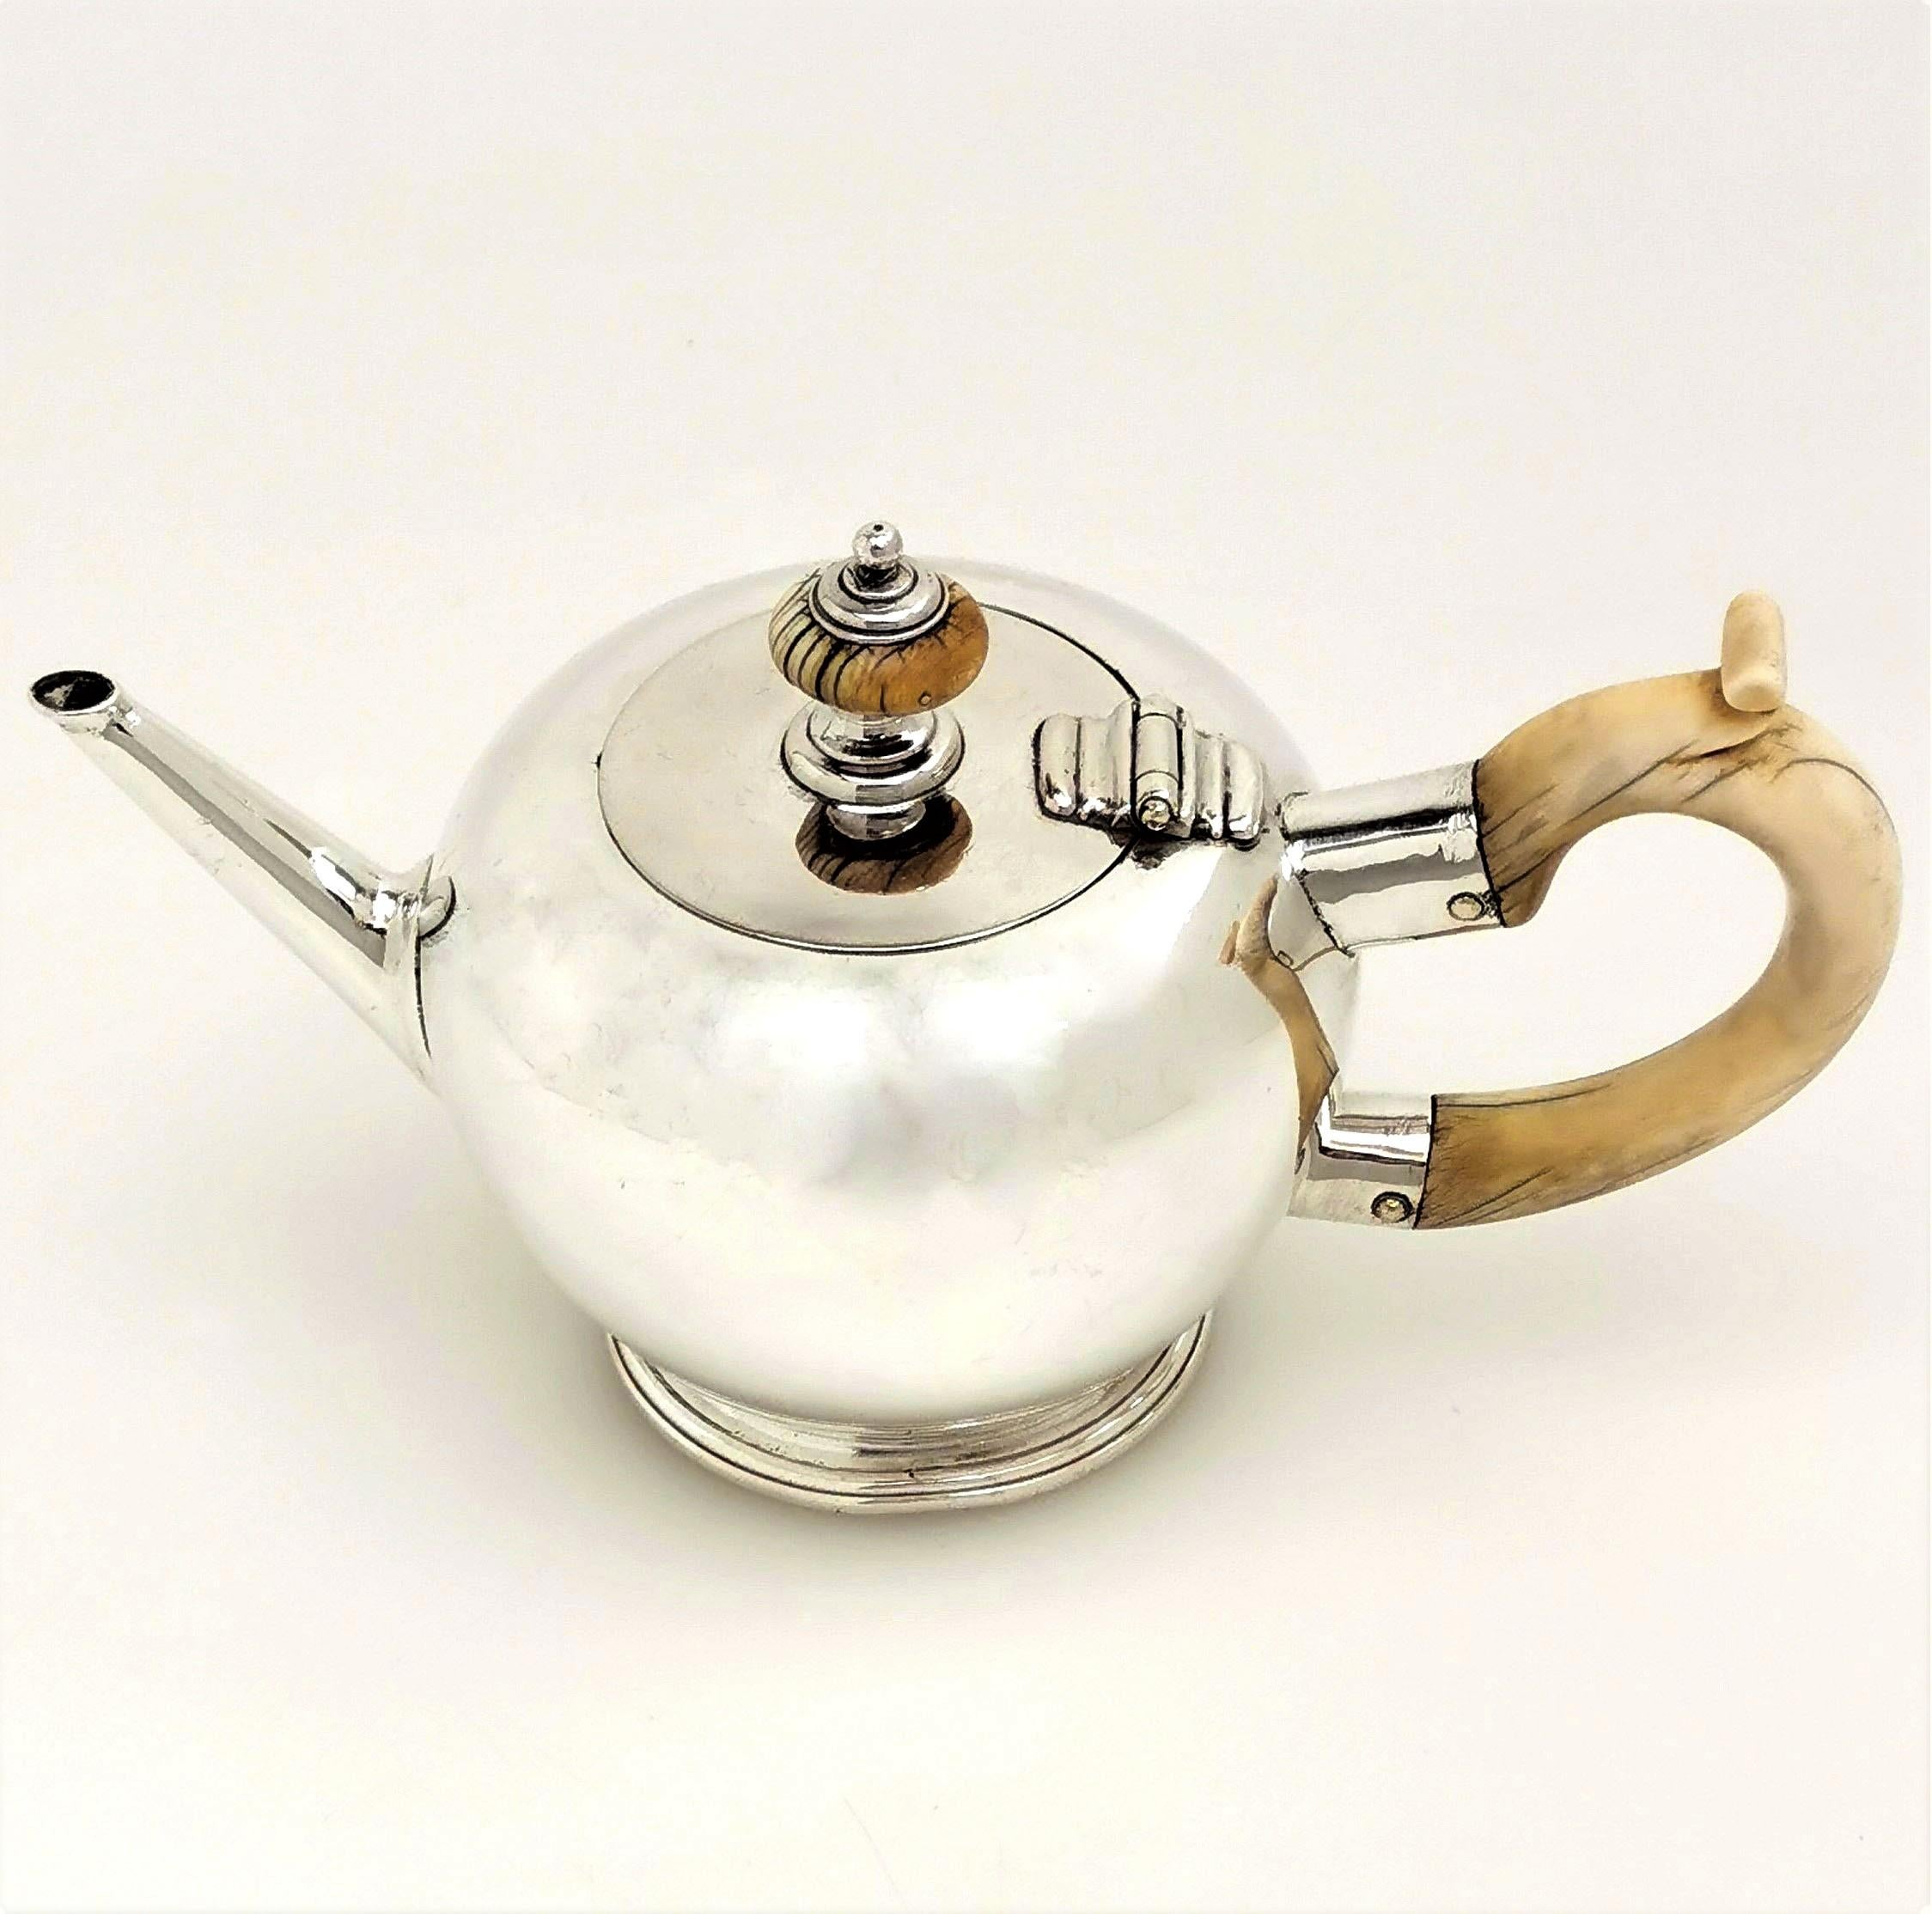 A lovely Antique George I Solid Silver Teapot. This small silver Teapot is perfect for single servings and as such is known as a Bachelor Teapot. The Tea Pot has a cream handle and finial. This Teapot is an excellent example of the classic